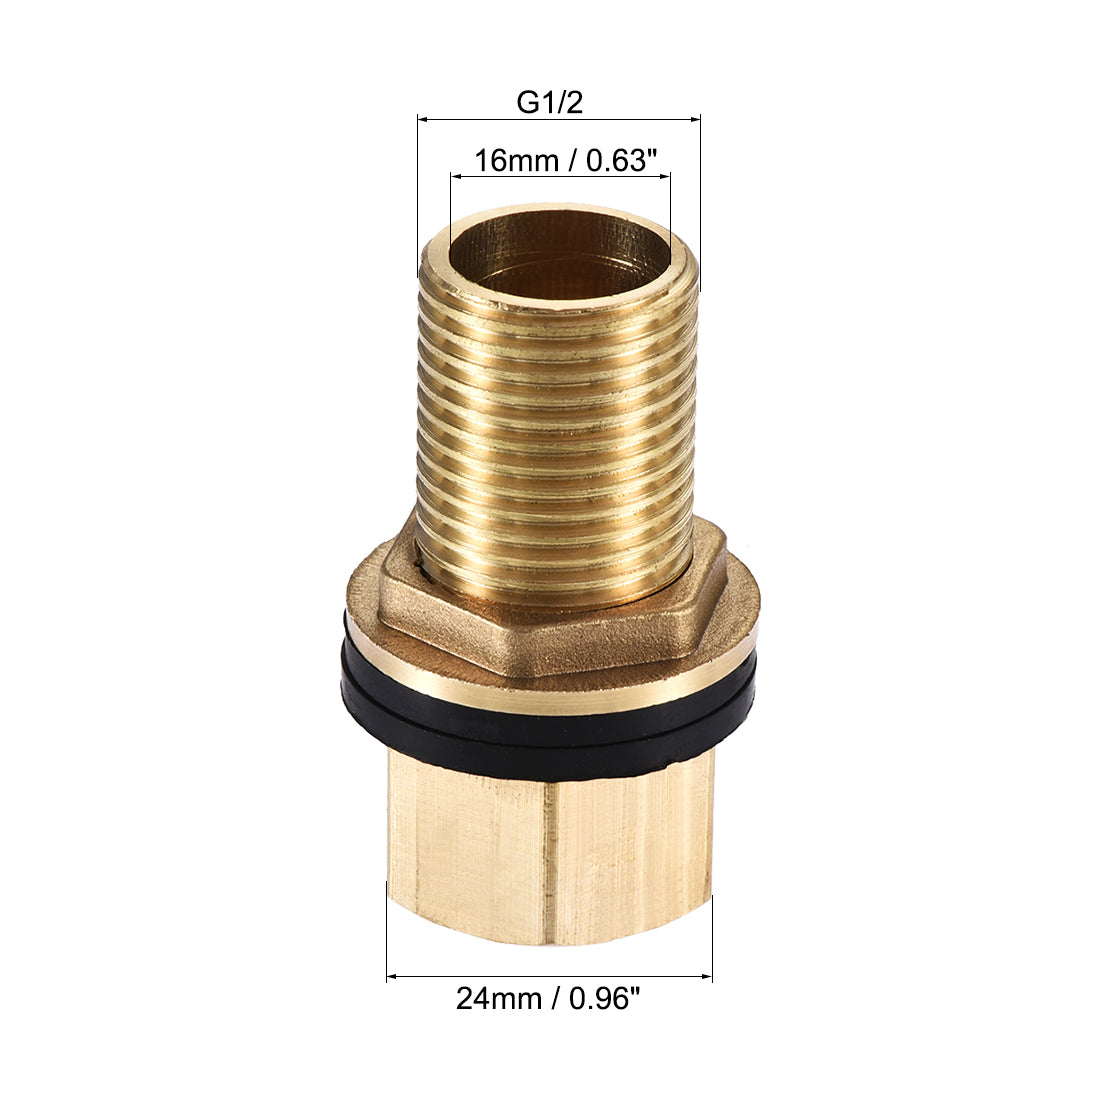 Uxcell Uxcell Bulkhead Fitting, G1/2 Male 0.75" Female, Hex Tube Adaptor Hose Fitting, with Silicone Gaskets, for Water Tanks, Brass, Gold Tone